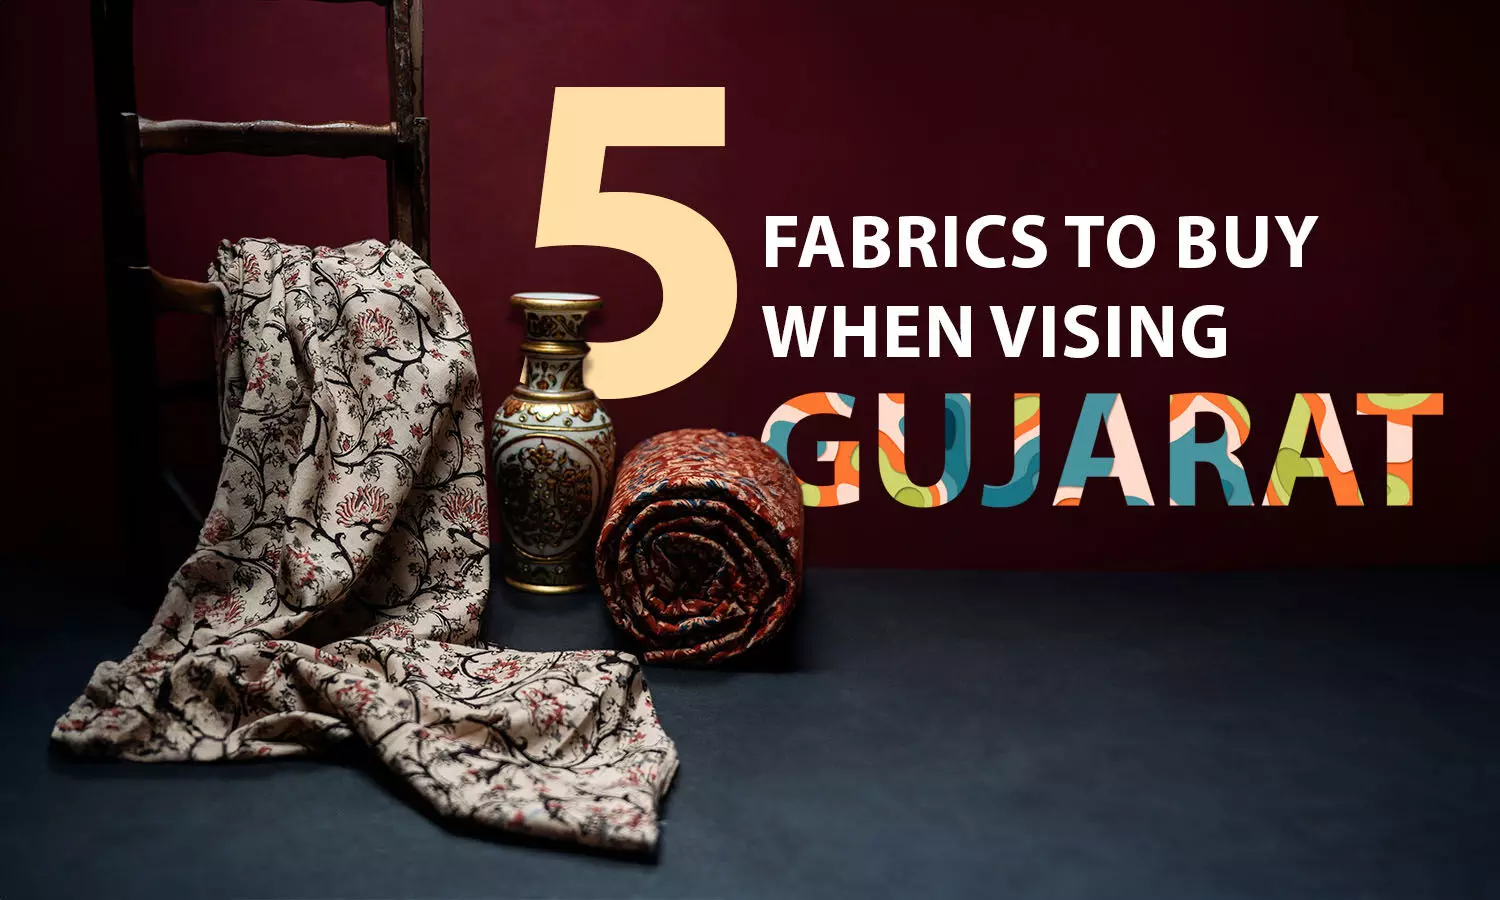 5 fabrics to purchase when visiting Gujarat